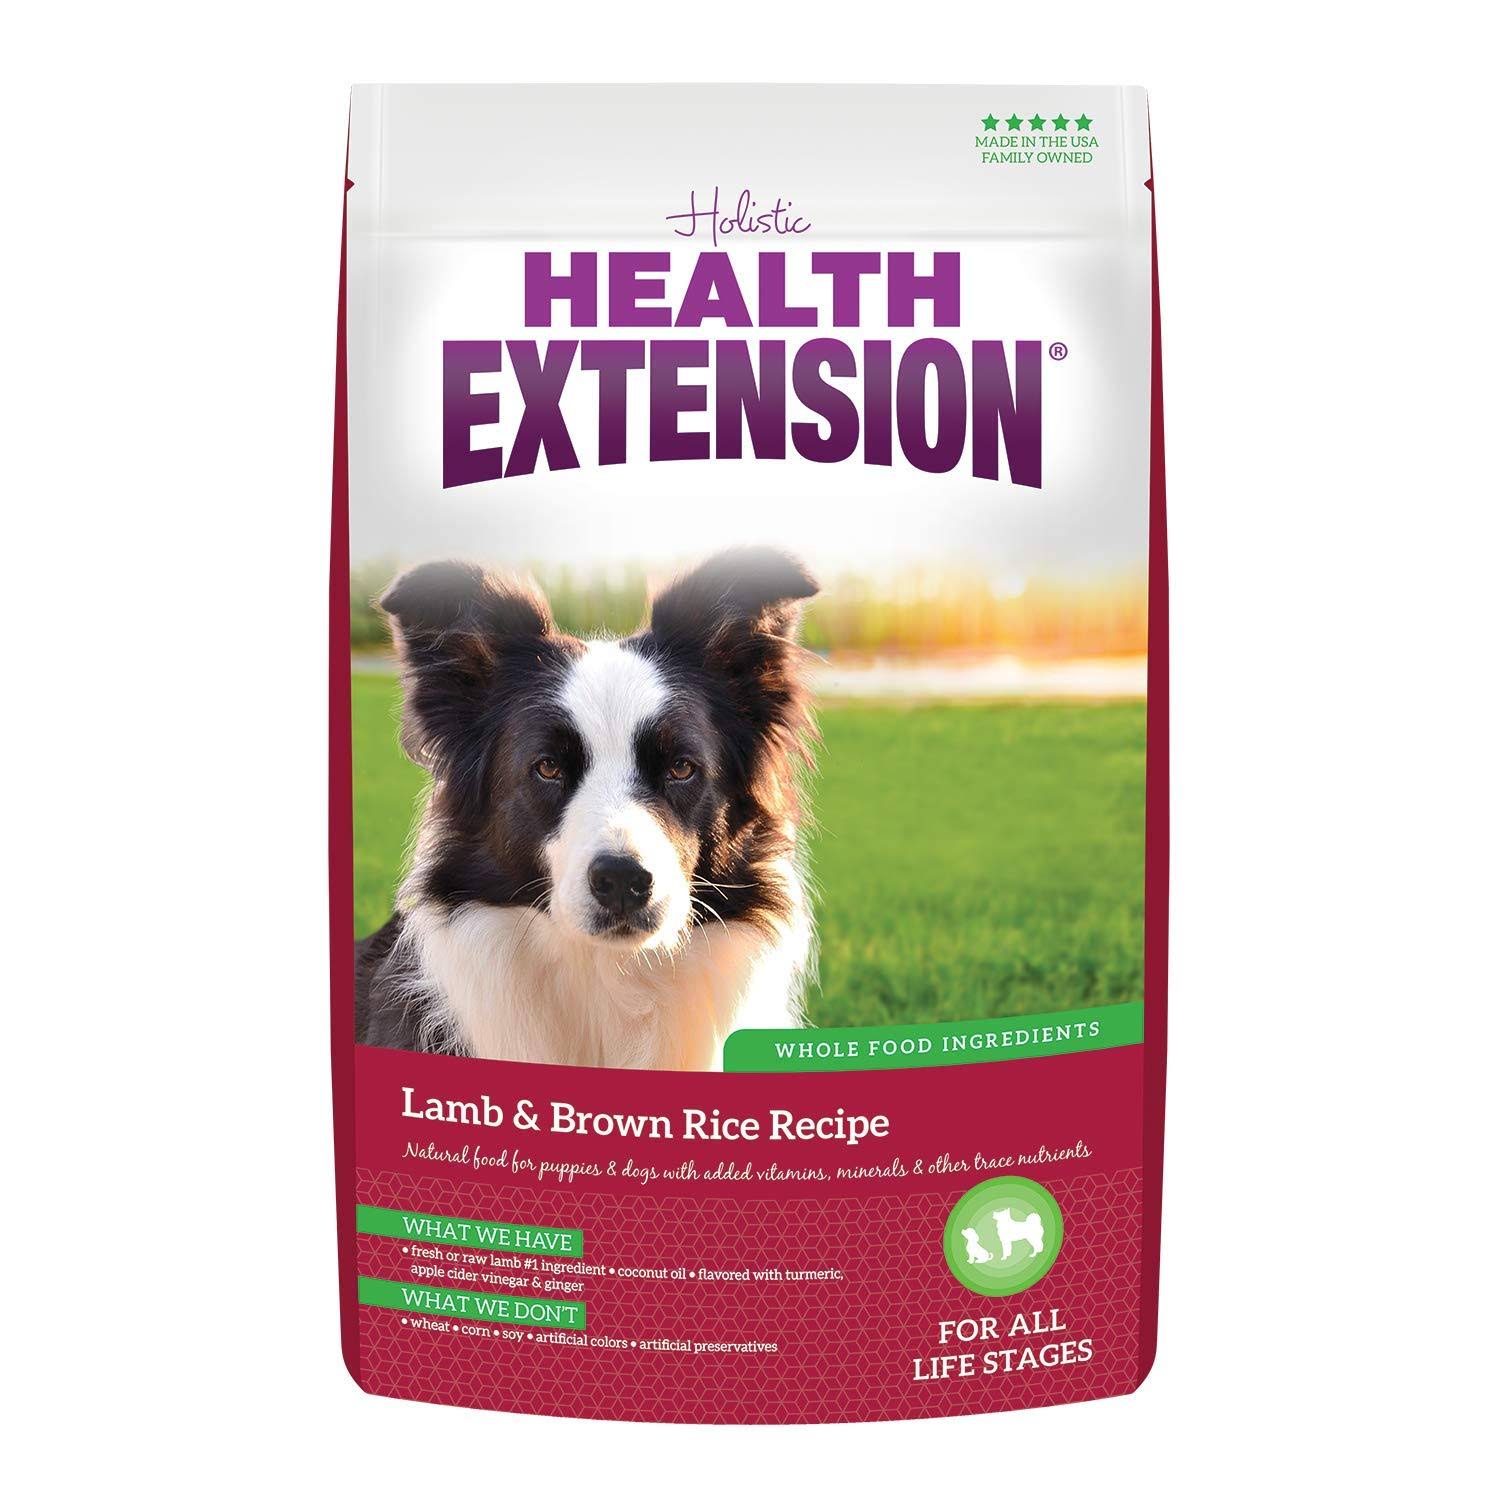 Holistic Health Extension Dog Food - Lamb and Brown Rice, 15lb